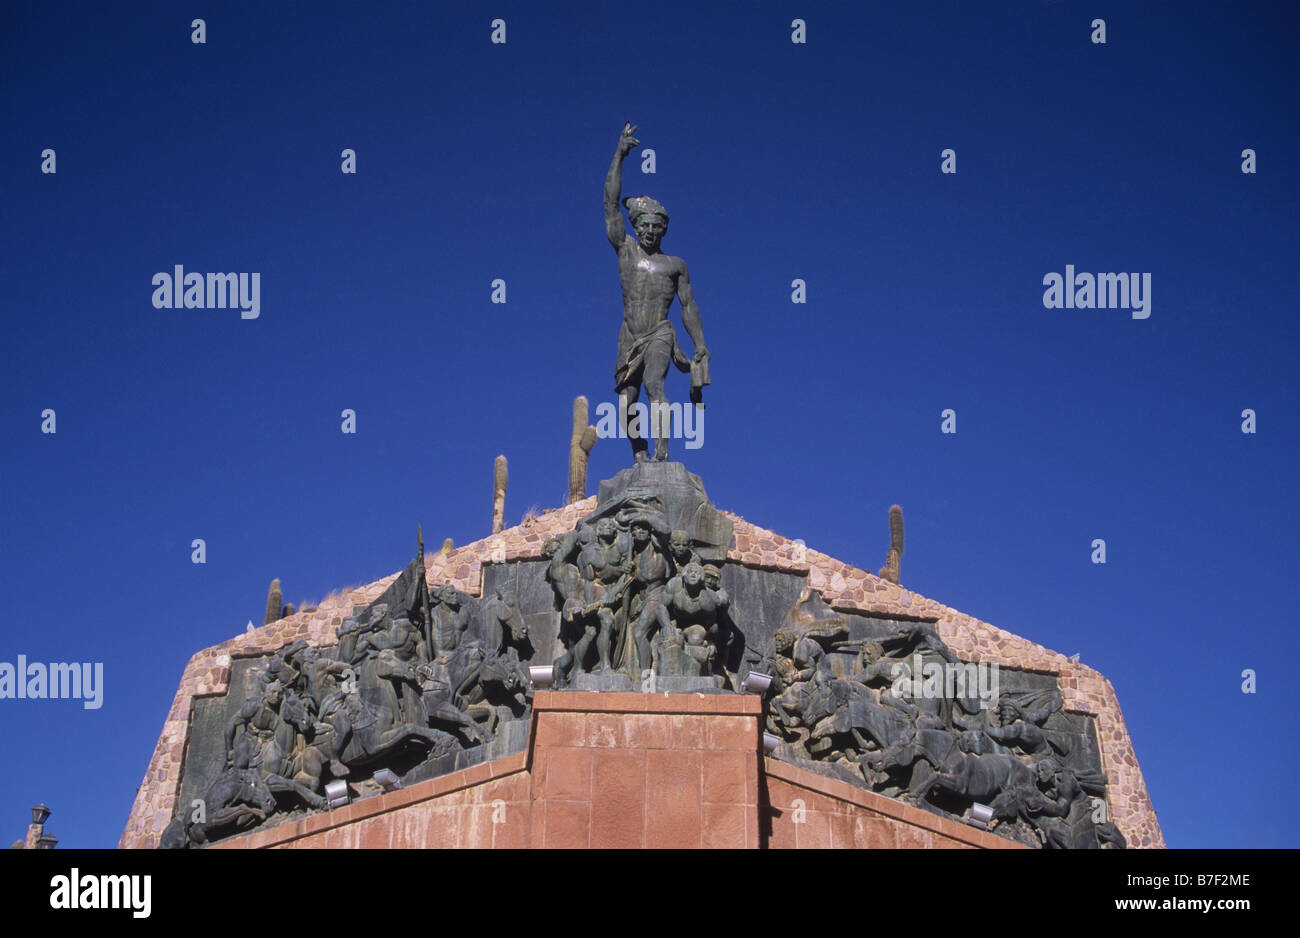 Detail of sculpture of indigenous leader on top of the Independence Heroes monument / Monumento a los Héroes de la Independencia, Humahuaca, Argentina Stock Photo